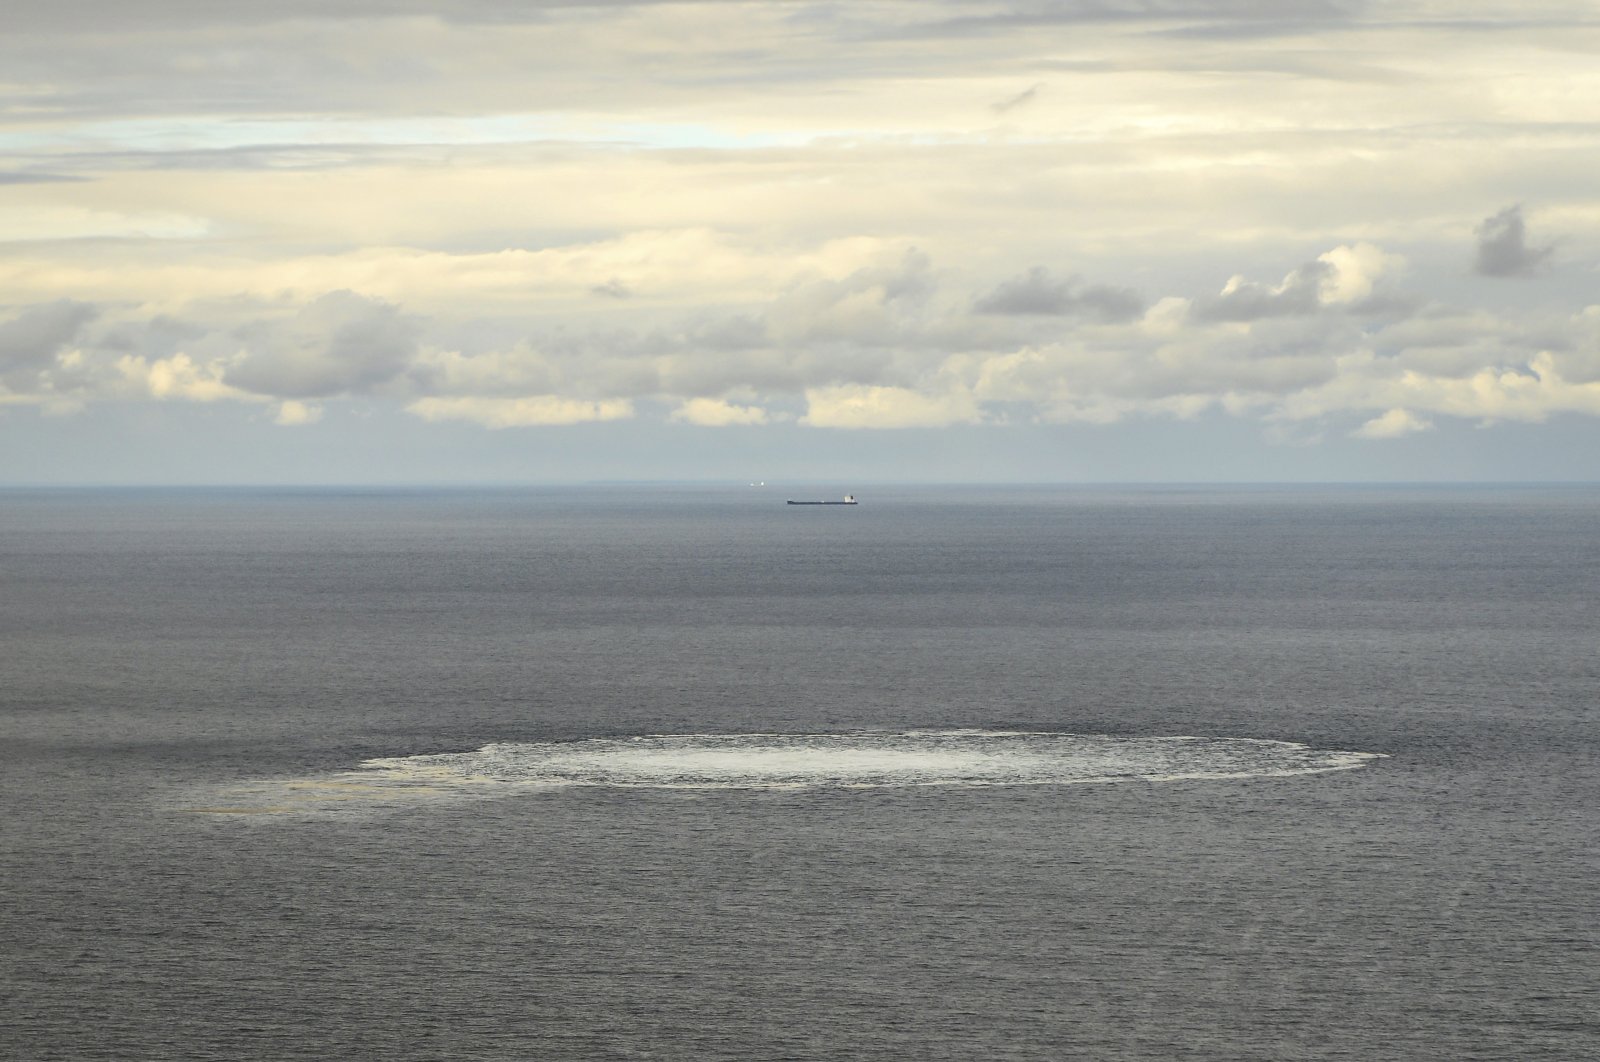 A view of the disturbance in the water above the Nord Stream gas leak in the Baltic Sea, Sept. 29, 2022. (Armed Forces of Denmark handout via AP)